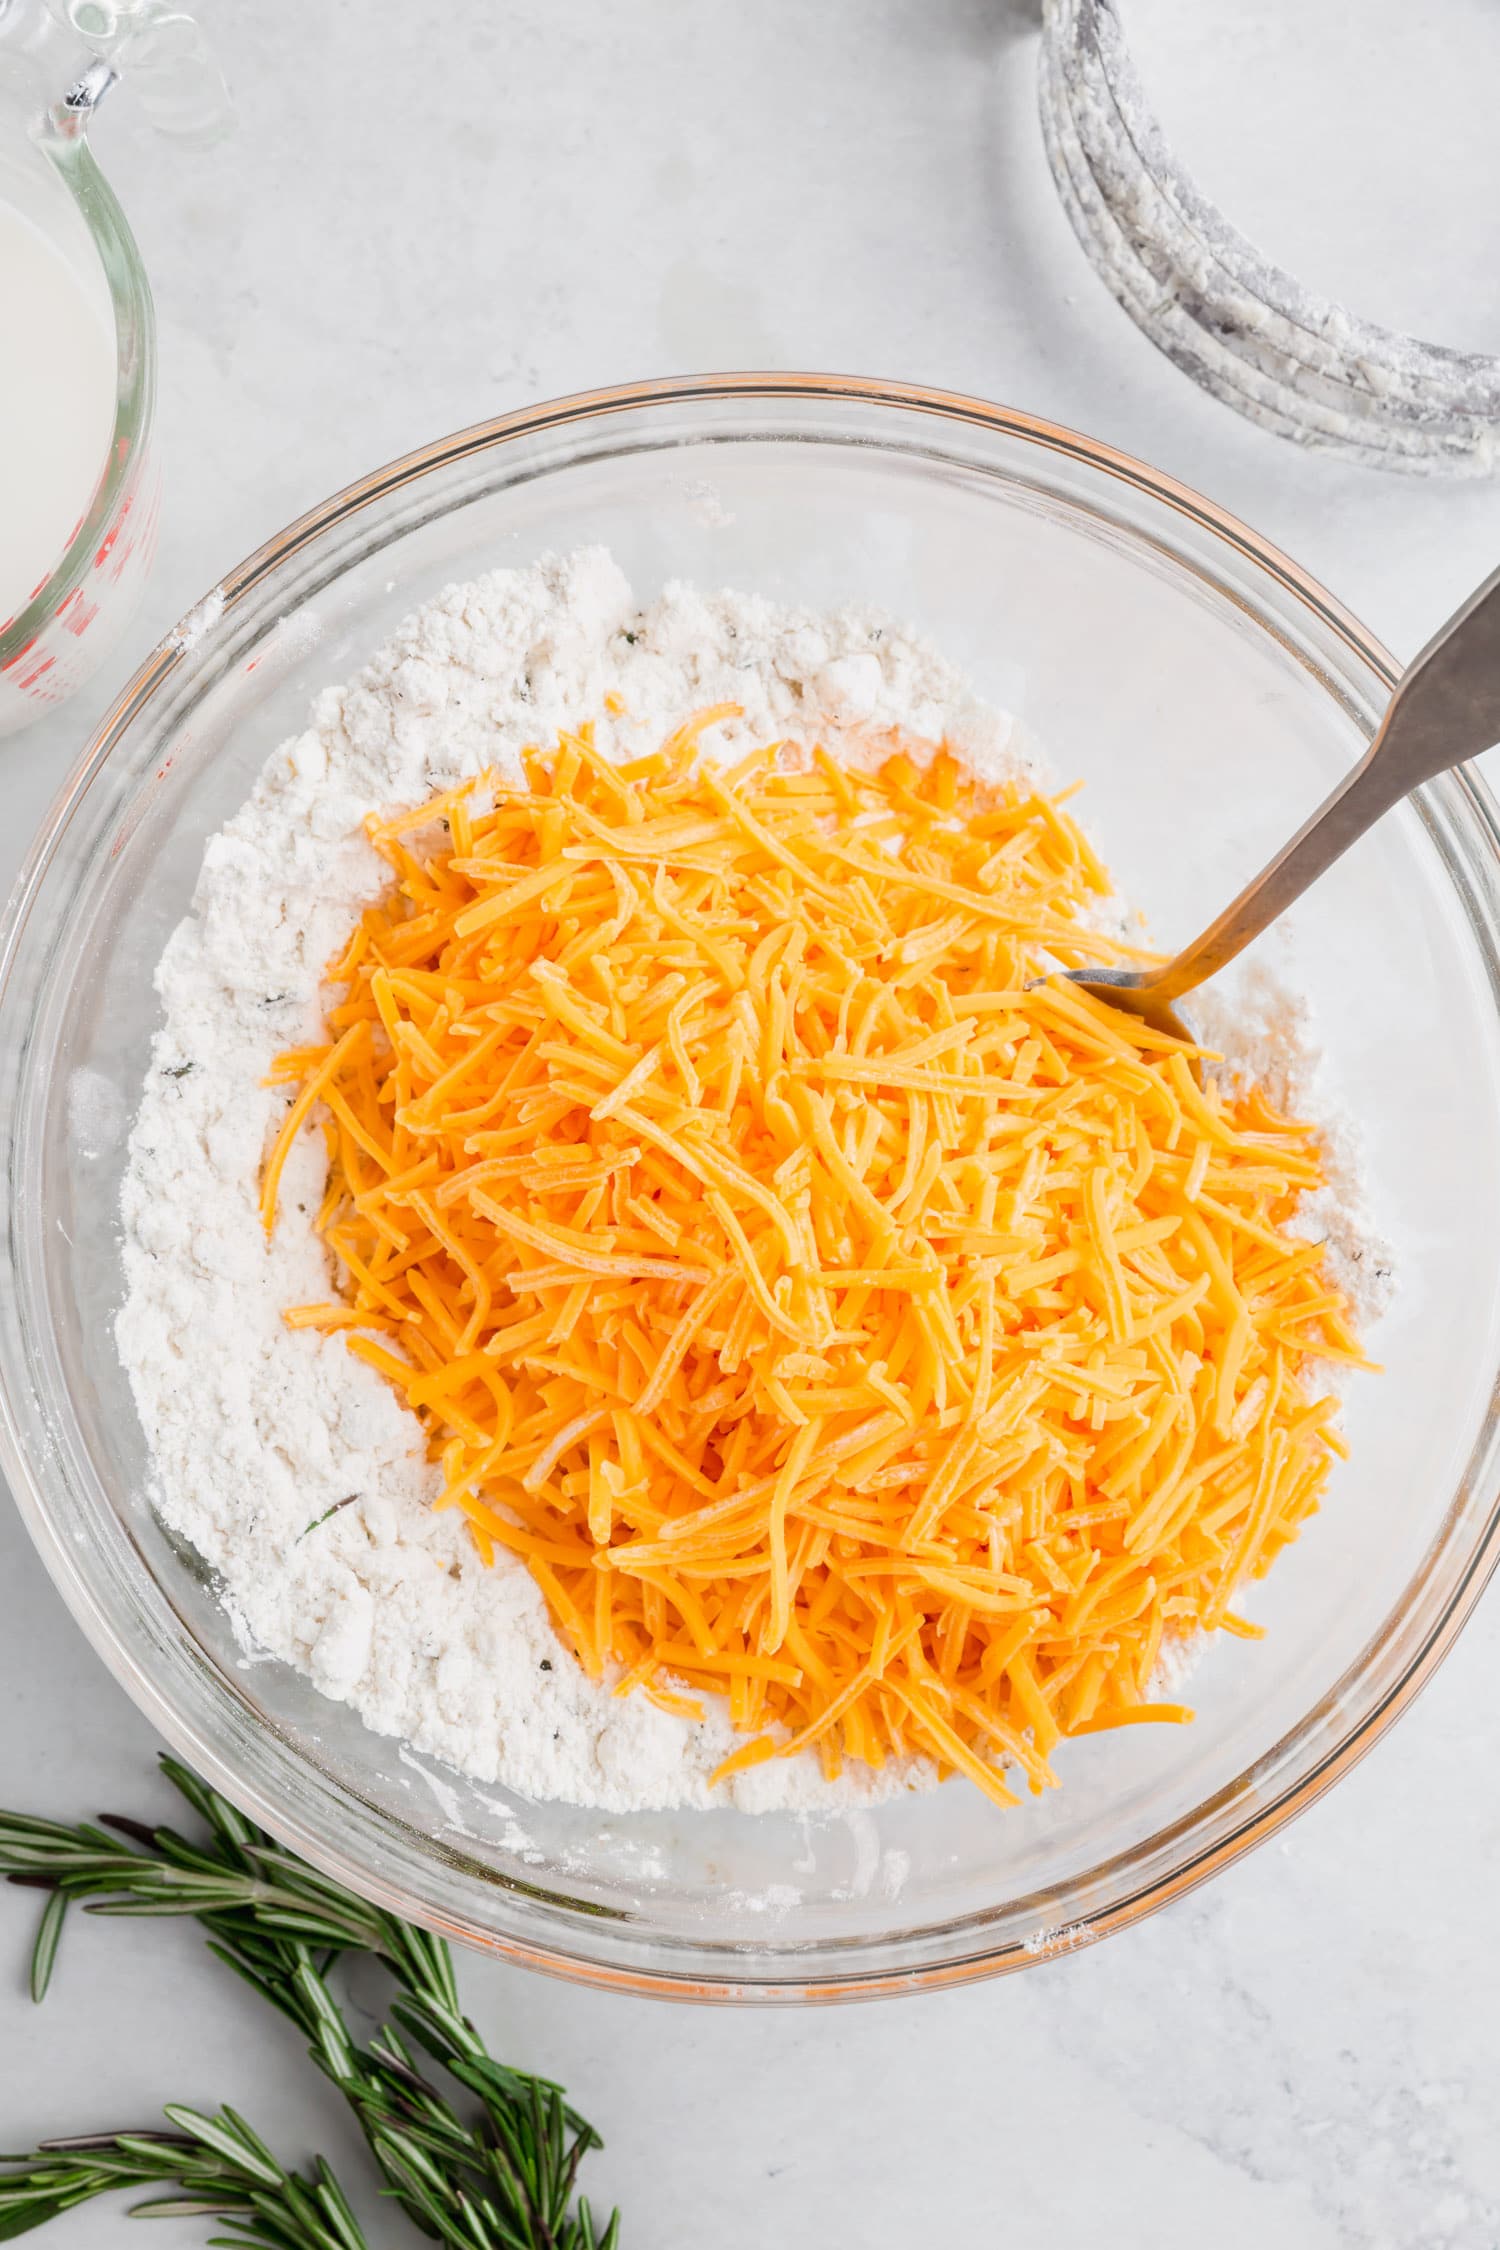 An overhead photo of a bowl of gluten-free flour with shredded cheddar cheese to make cheddar biscuits.